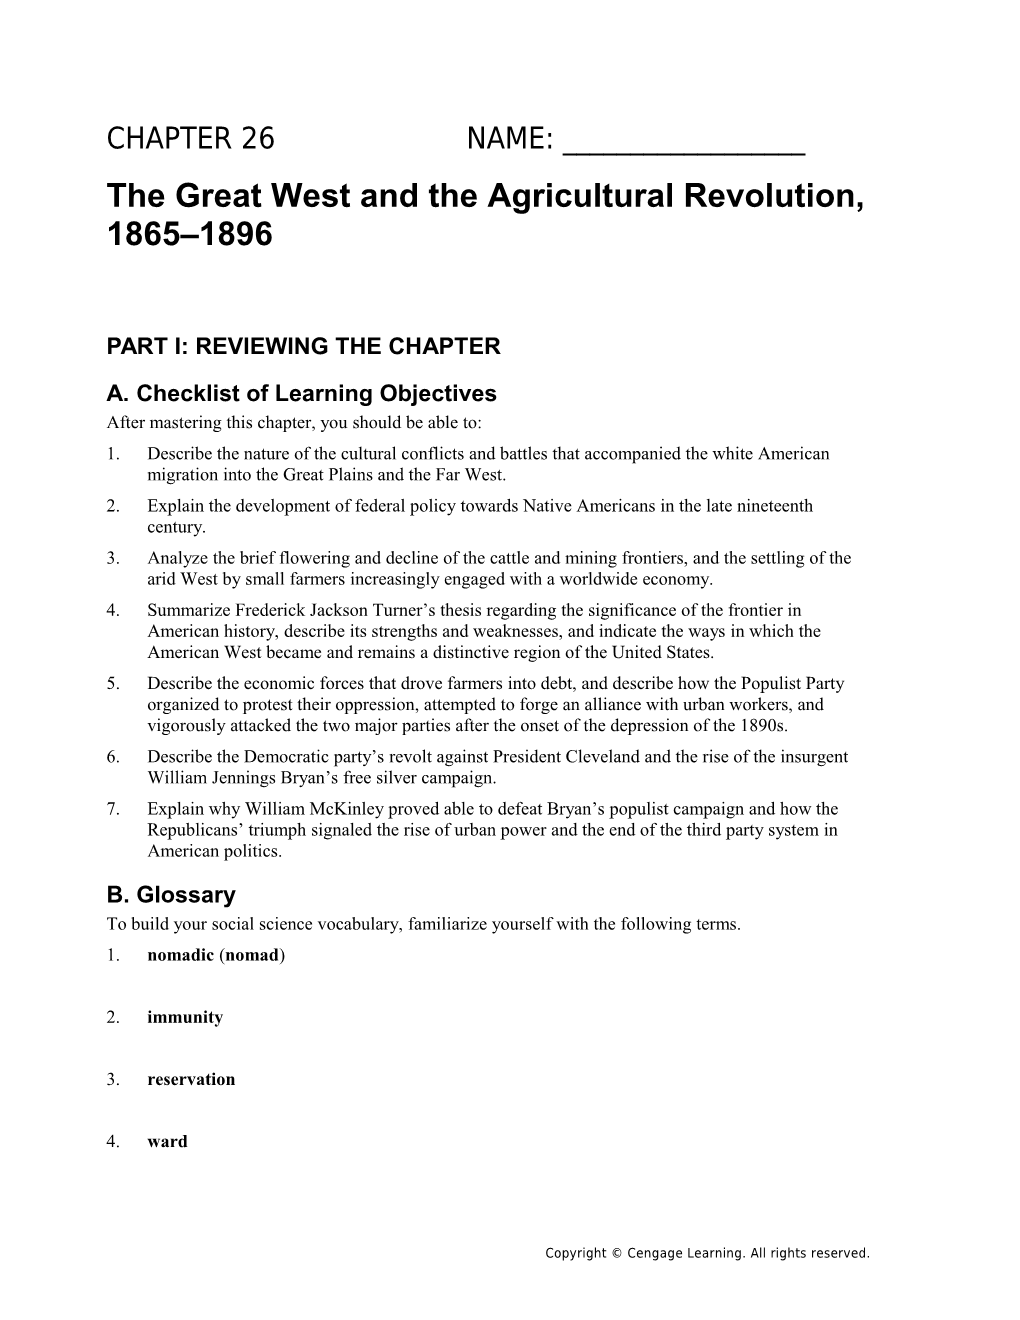 The Great West and the Agricultural Revolution, 1865 1896